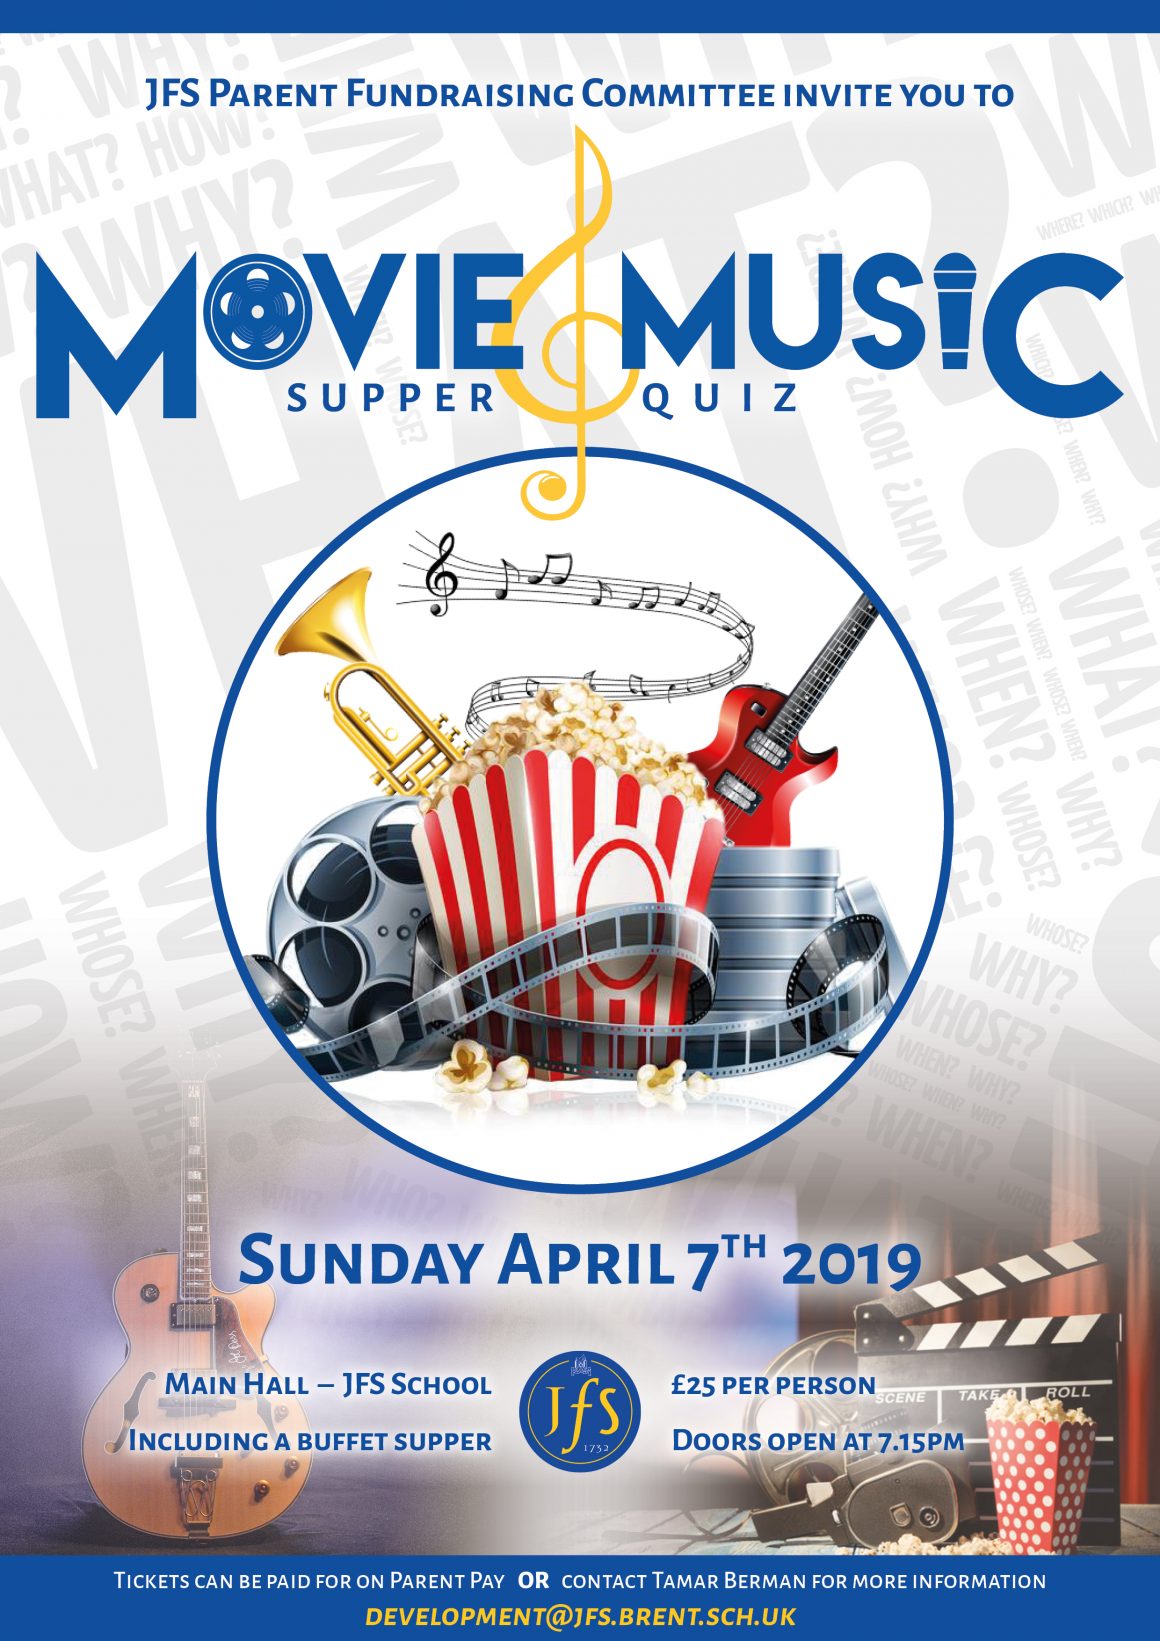 Movie and Music Supper Quiz